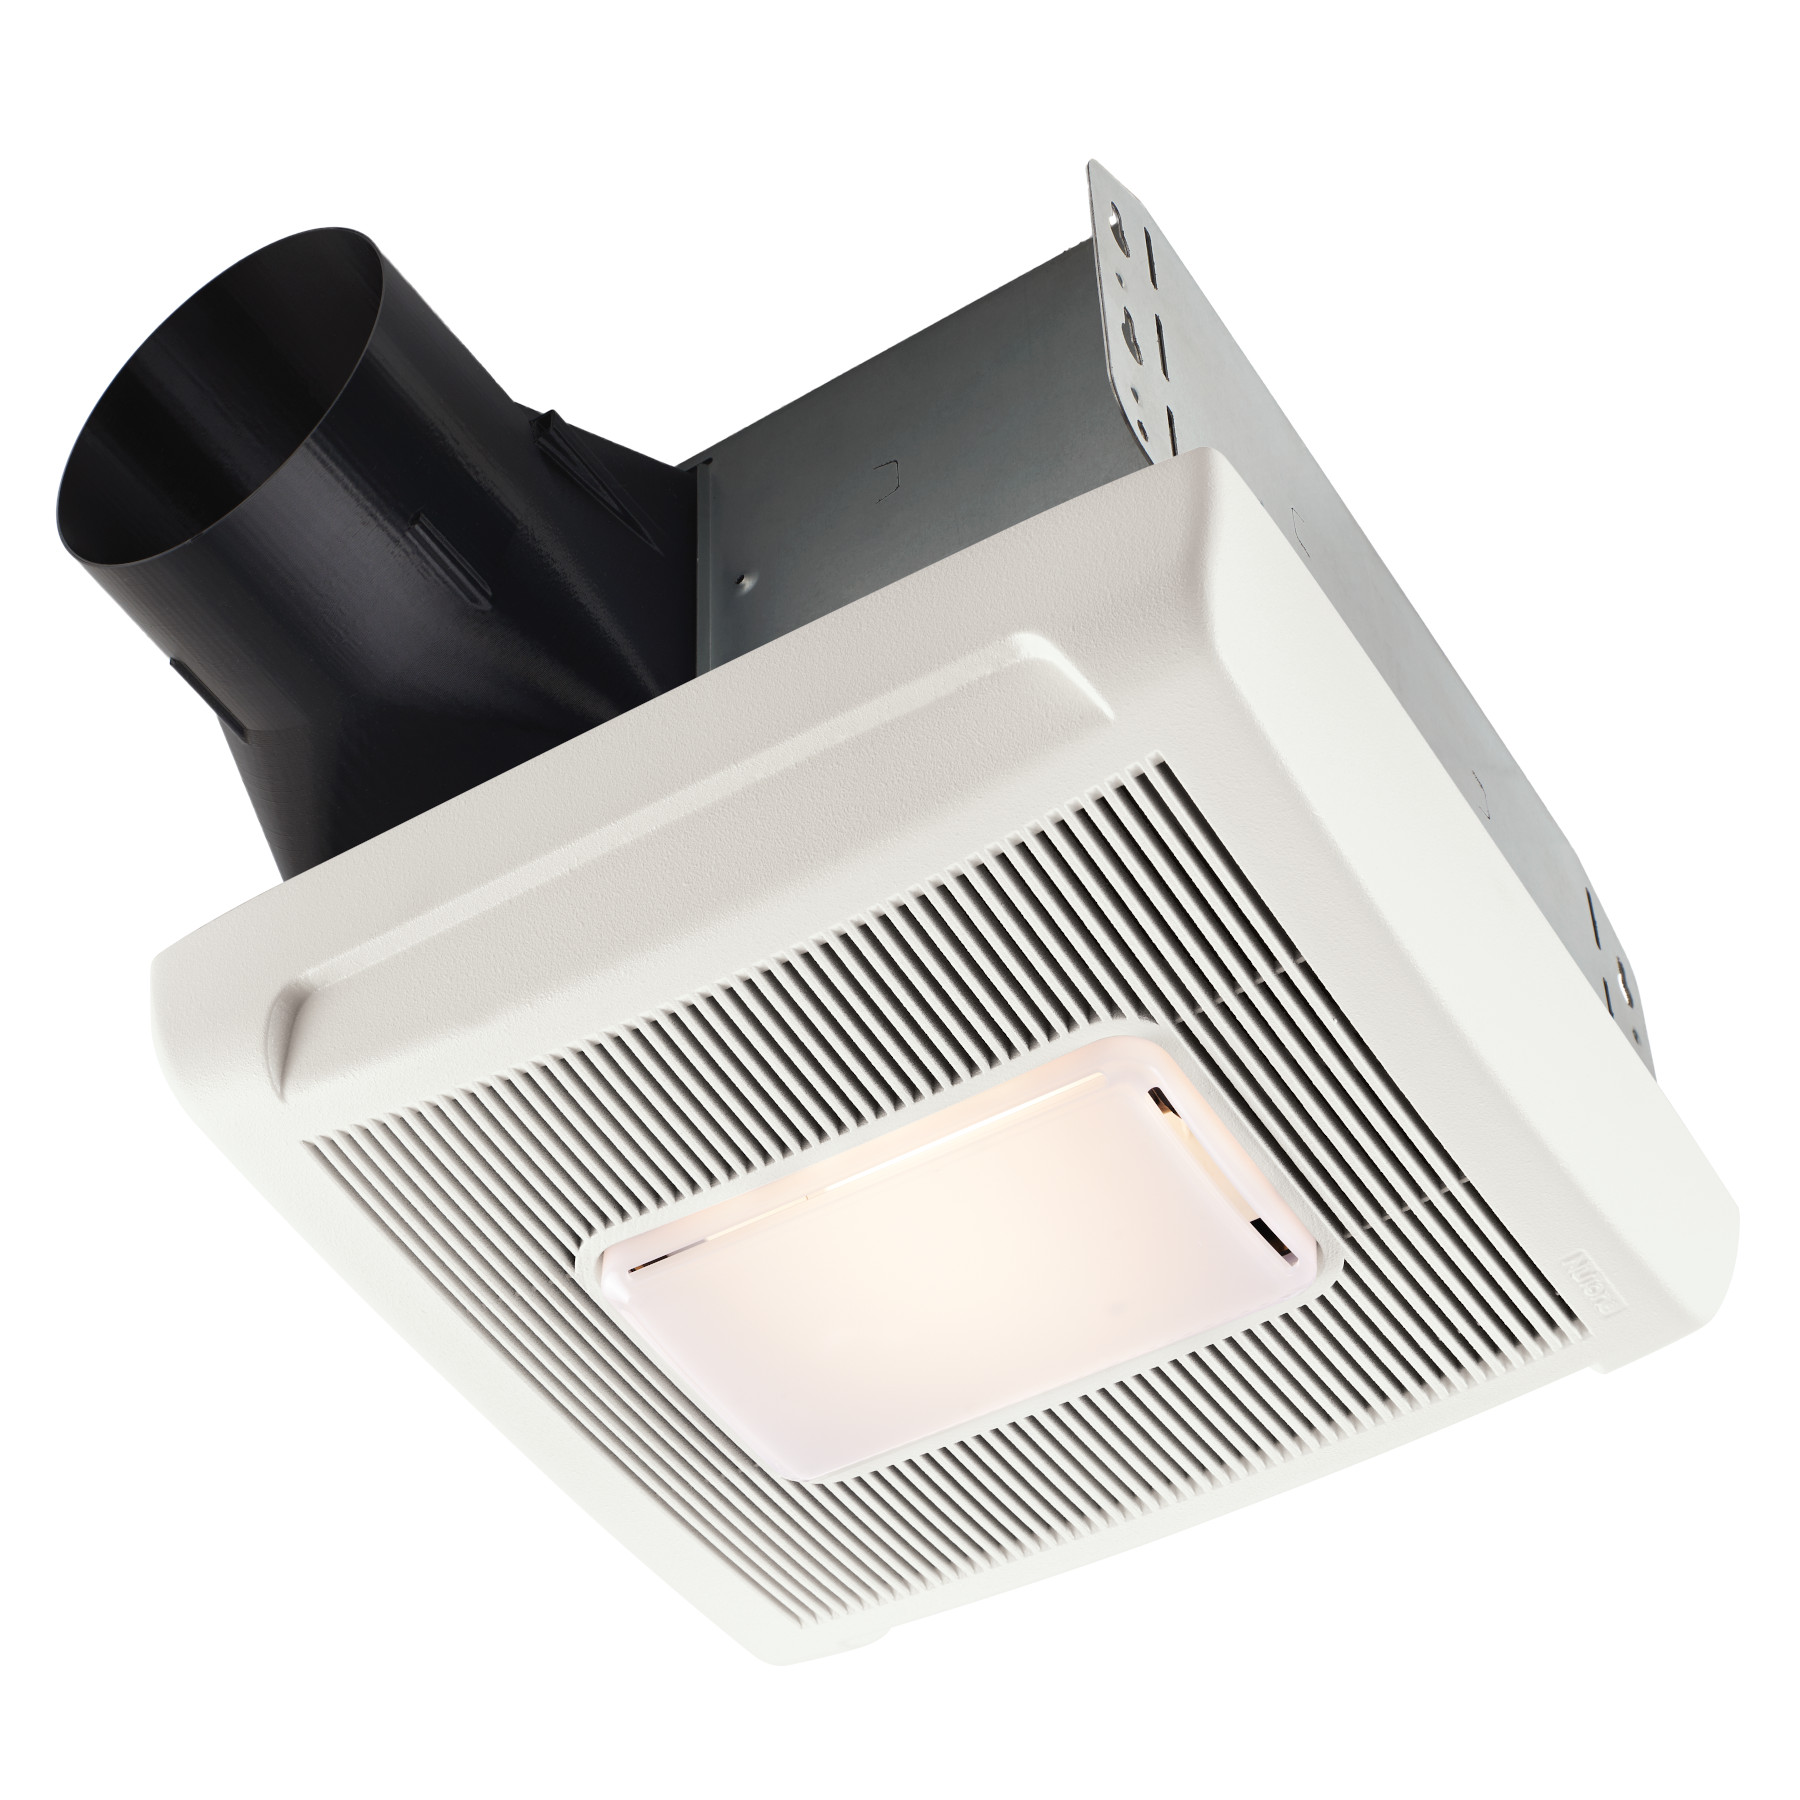 **DISCONTINUED** NuTone Flex Series 80 CFM Ceiling Room Side Installation Bathroom Exhaust Fan with Light